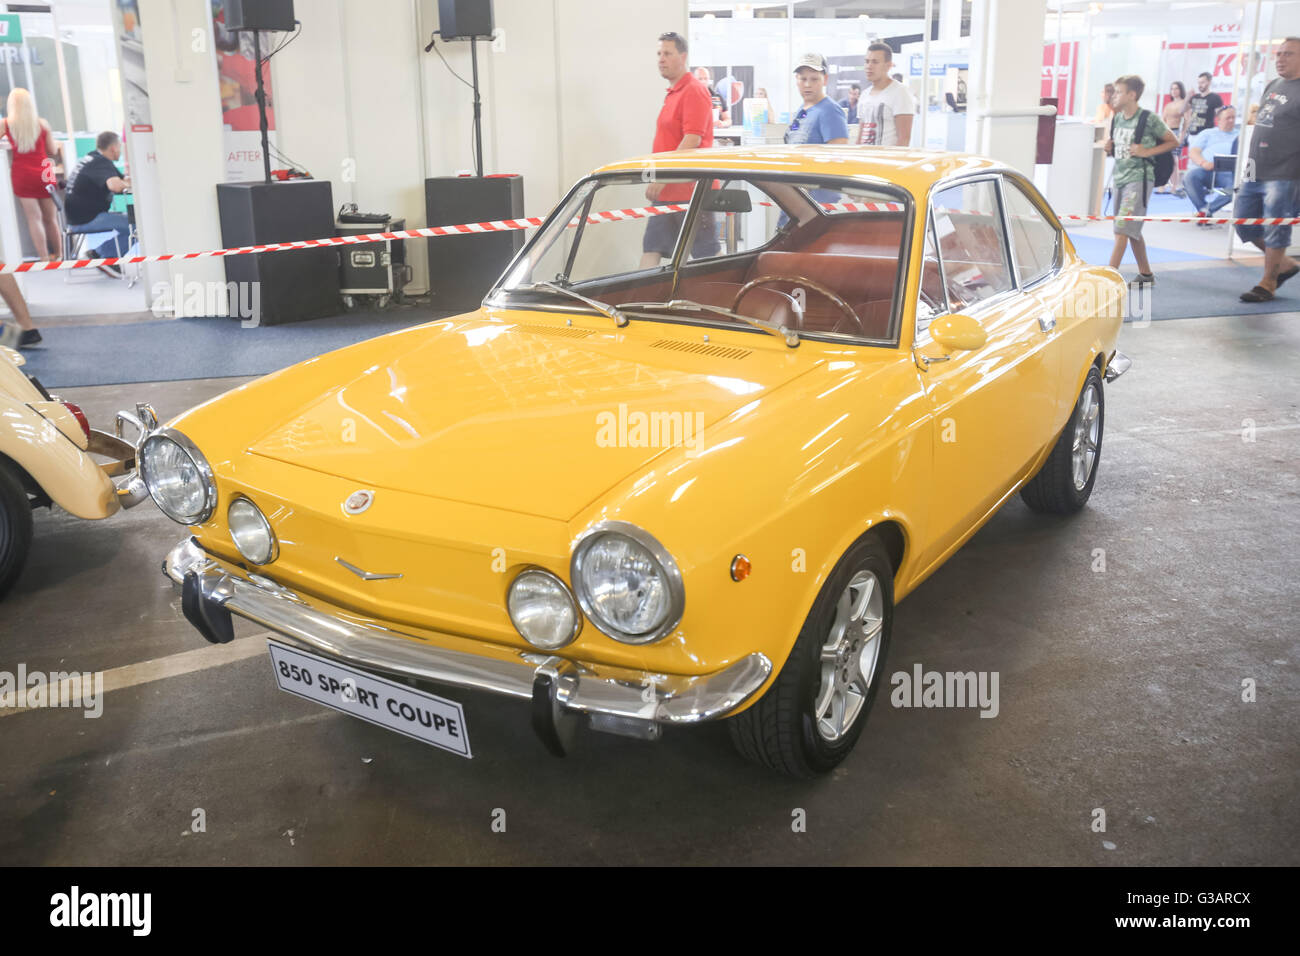 ZAGREB, CROATIA - JUNE 4, 2016 : A Fiat Fiat 850 Sport Coupe exhibited at Fast and furious street race in Zagreb, Croatia. Stock Photo